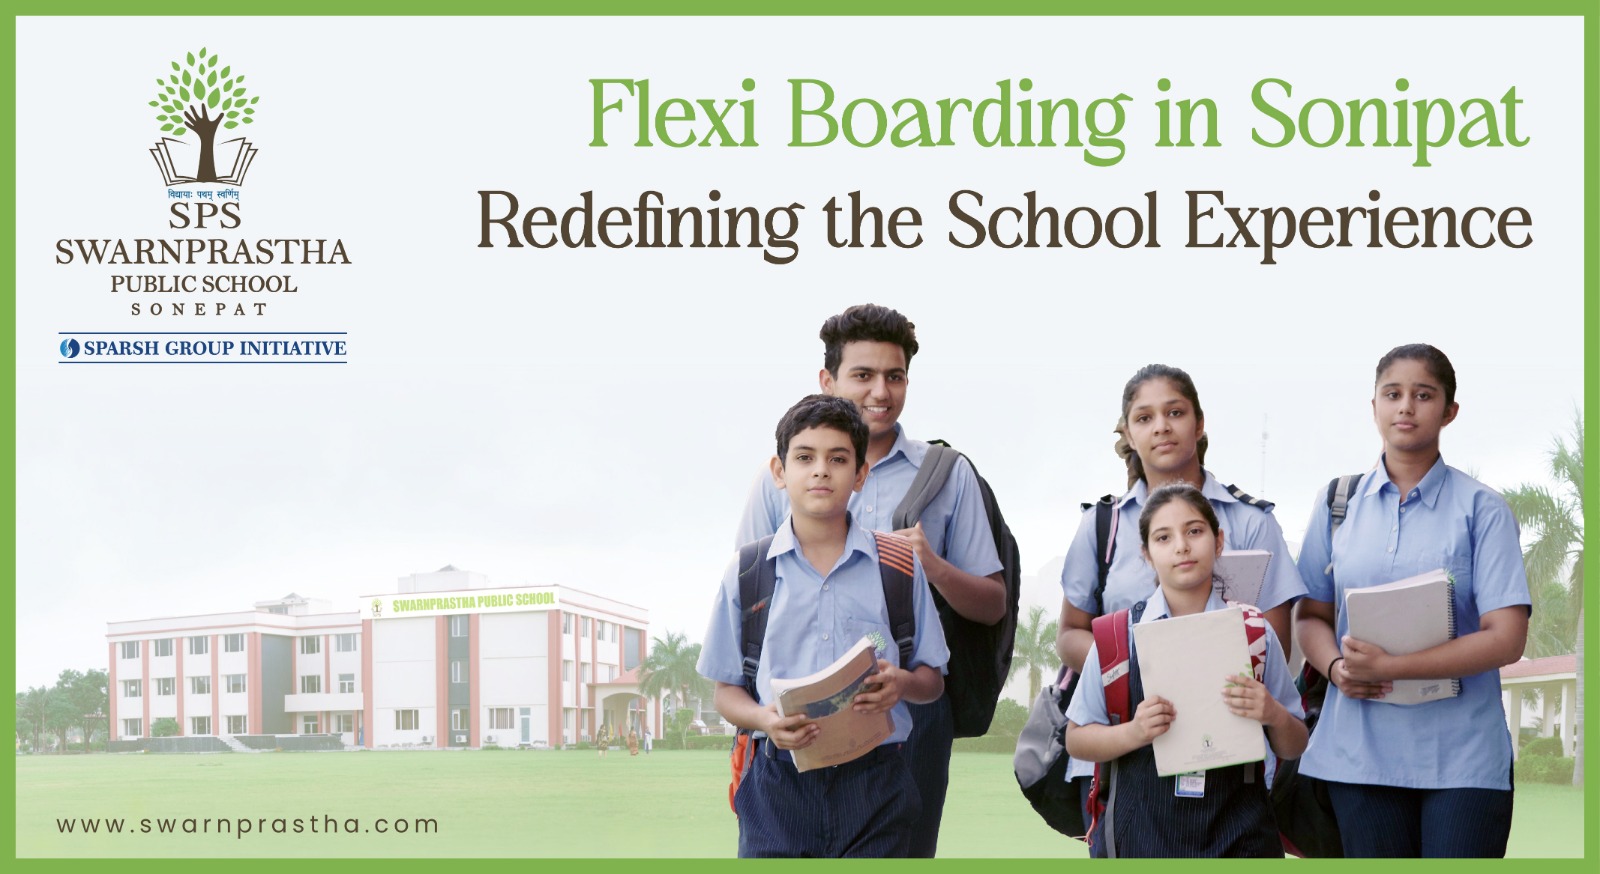 Flexi Boarding in Sonipat Redefining the School Experience